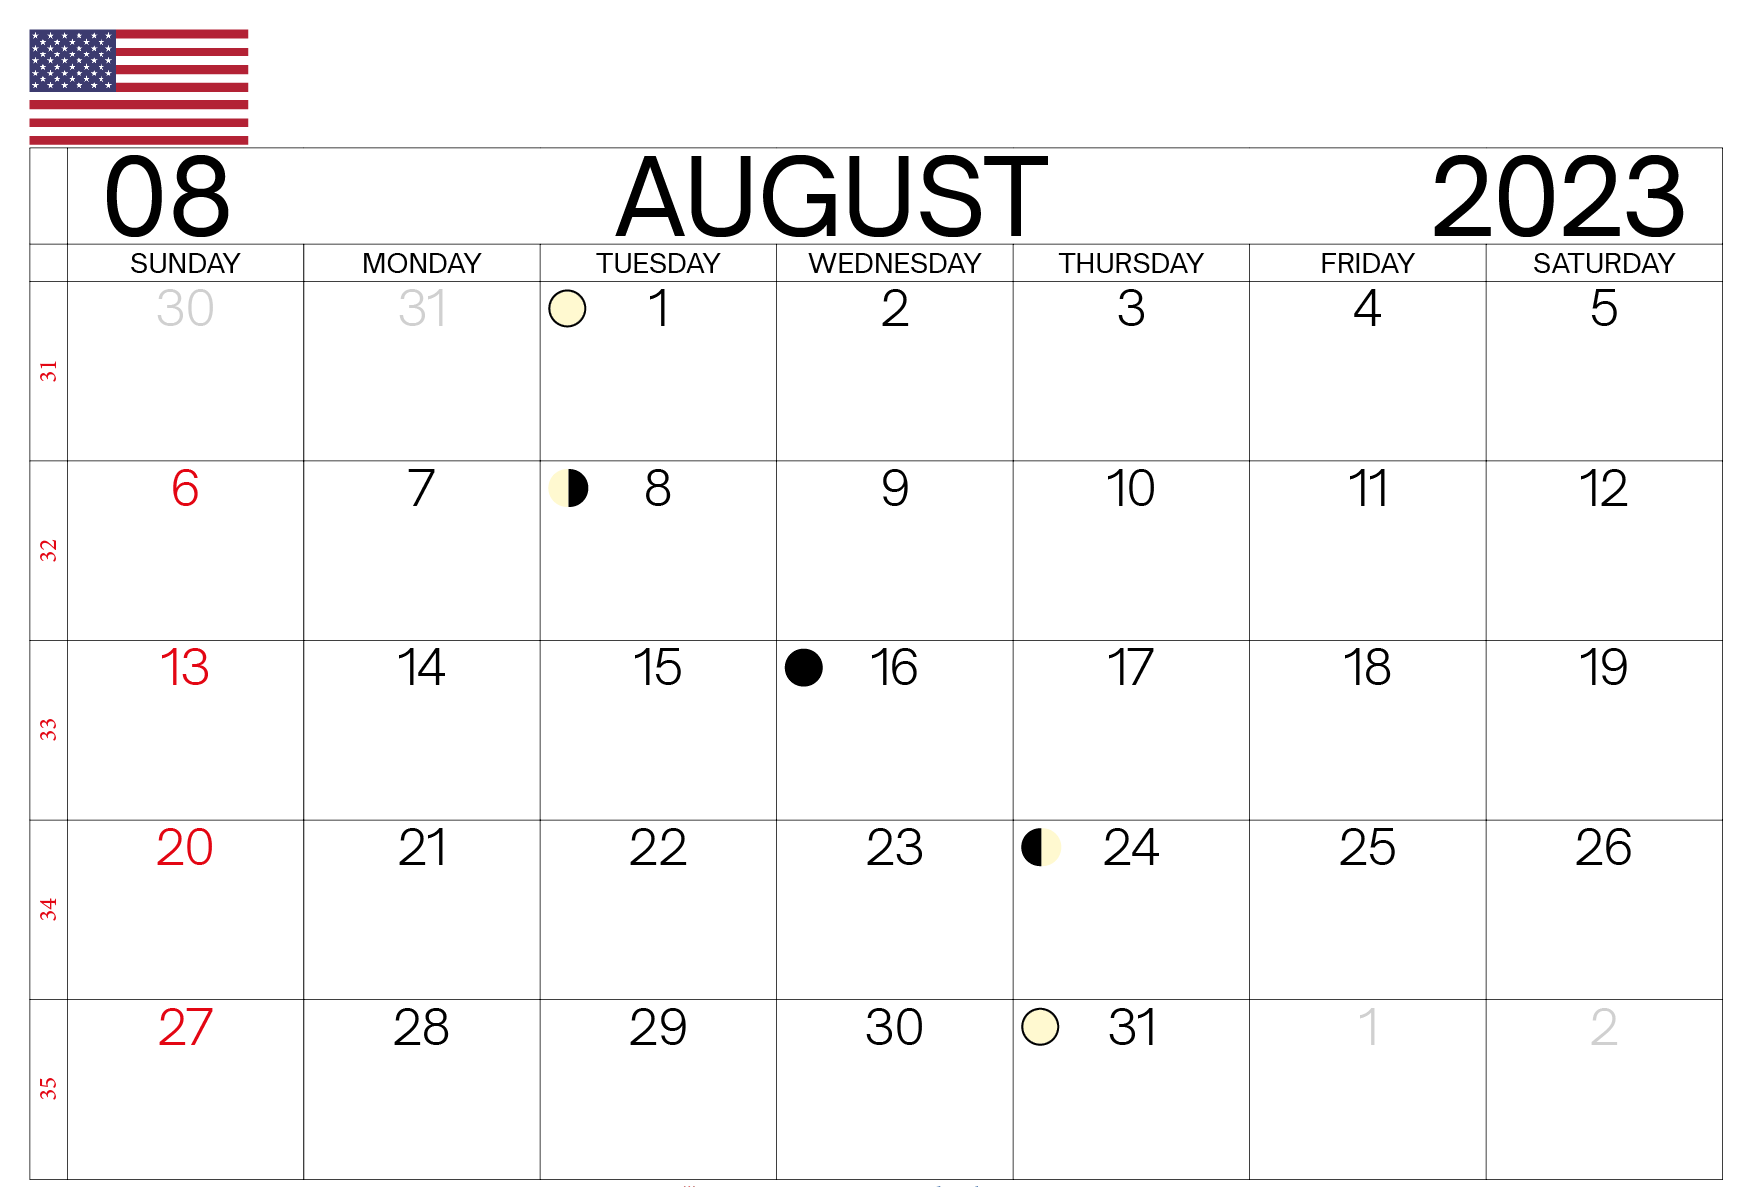 Planning Your August 2023 Calendar With Holidays USA